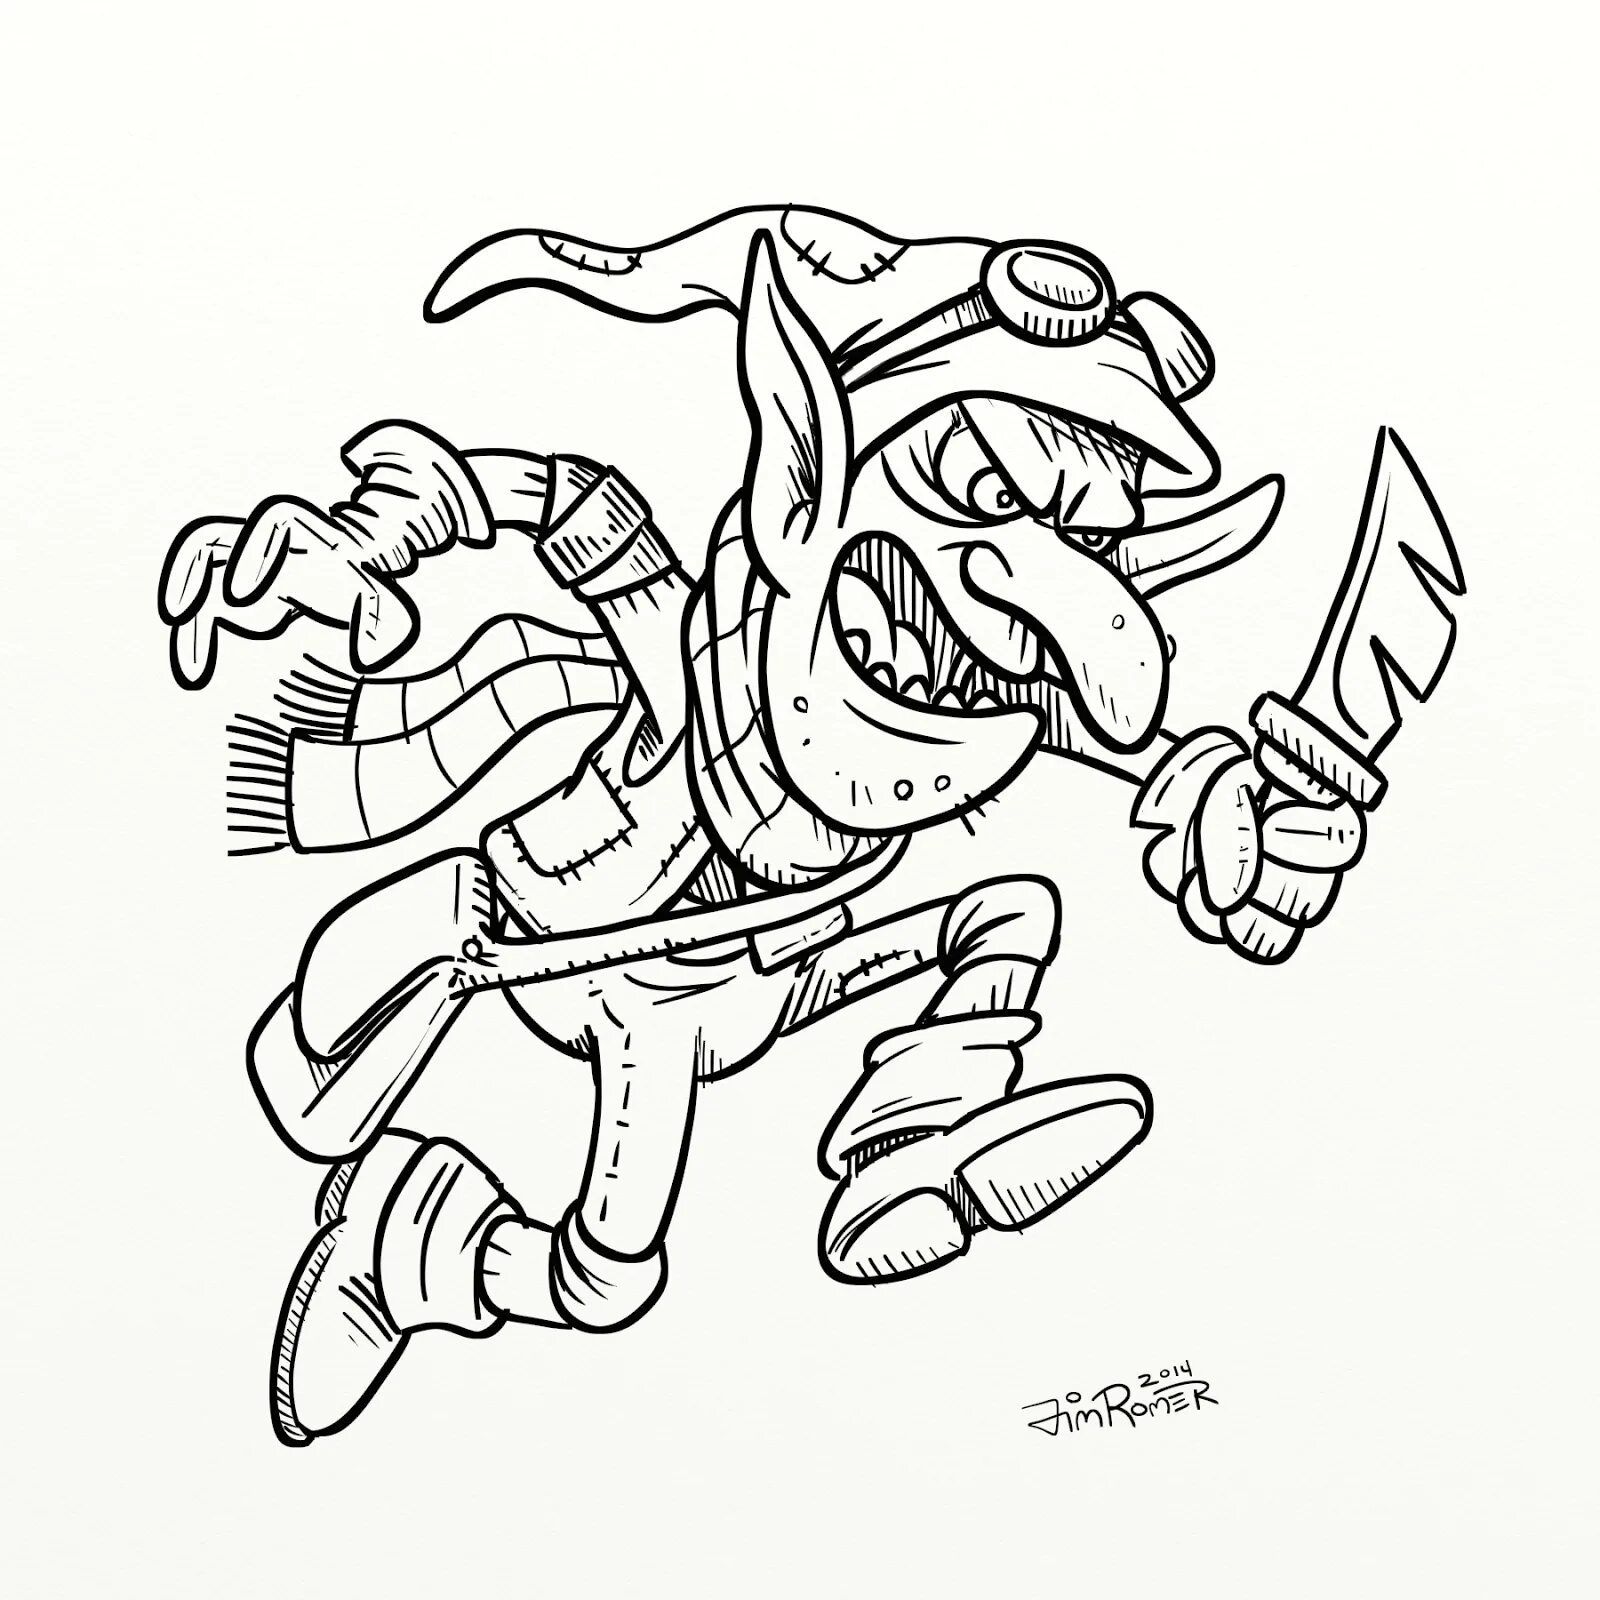 Decorated goblin core coloring page